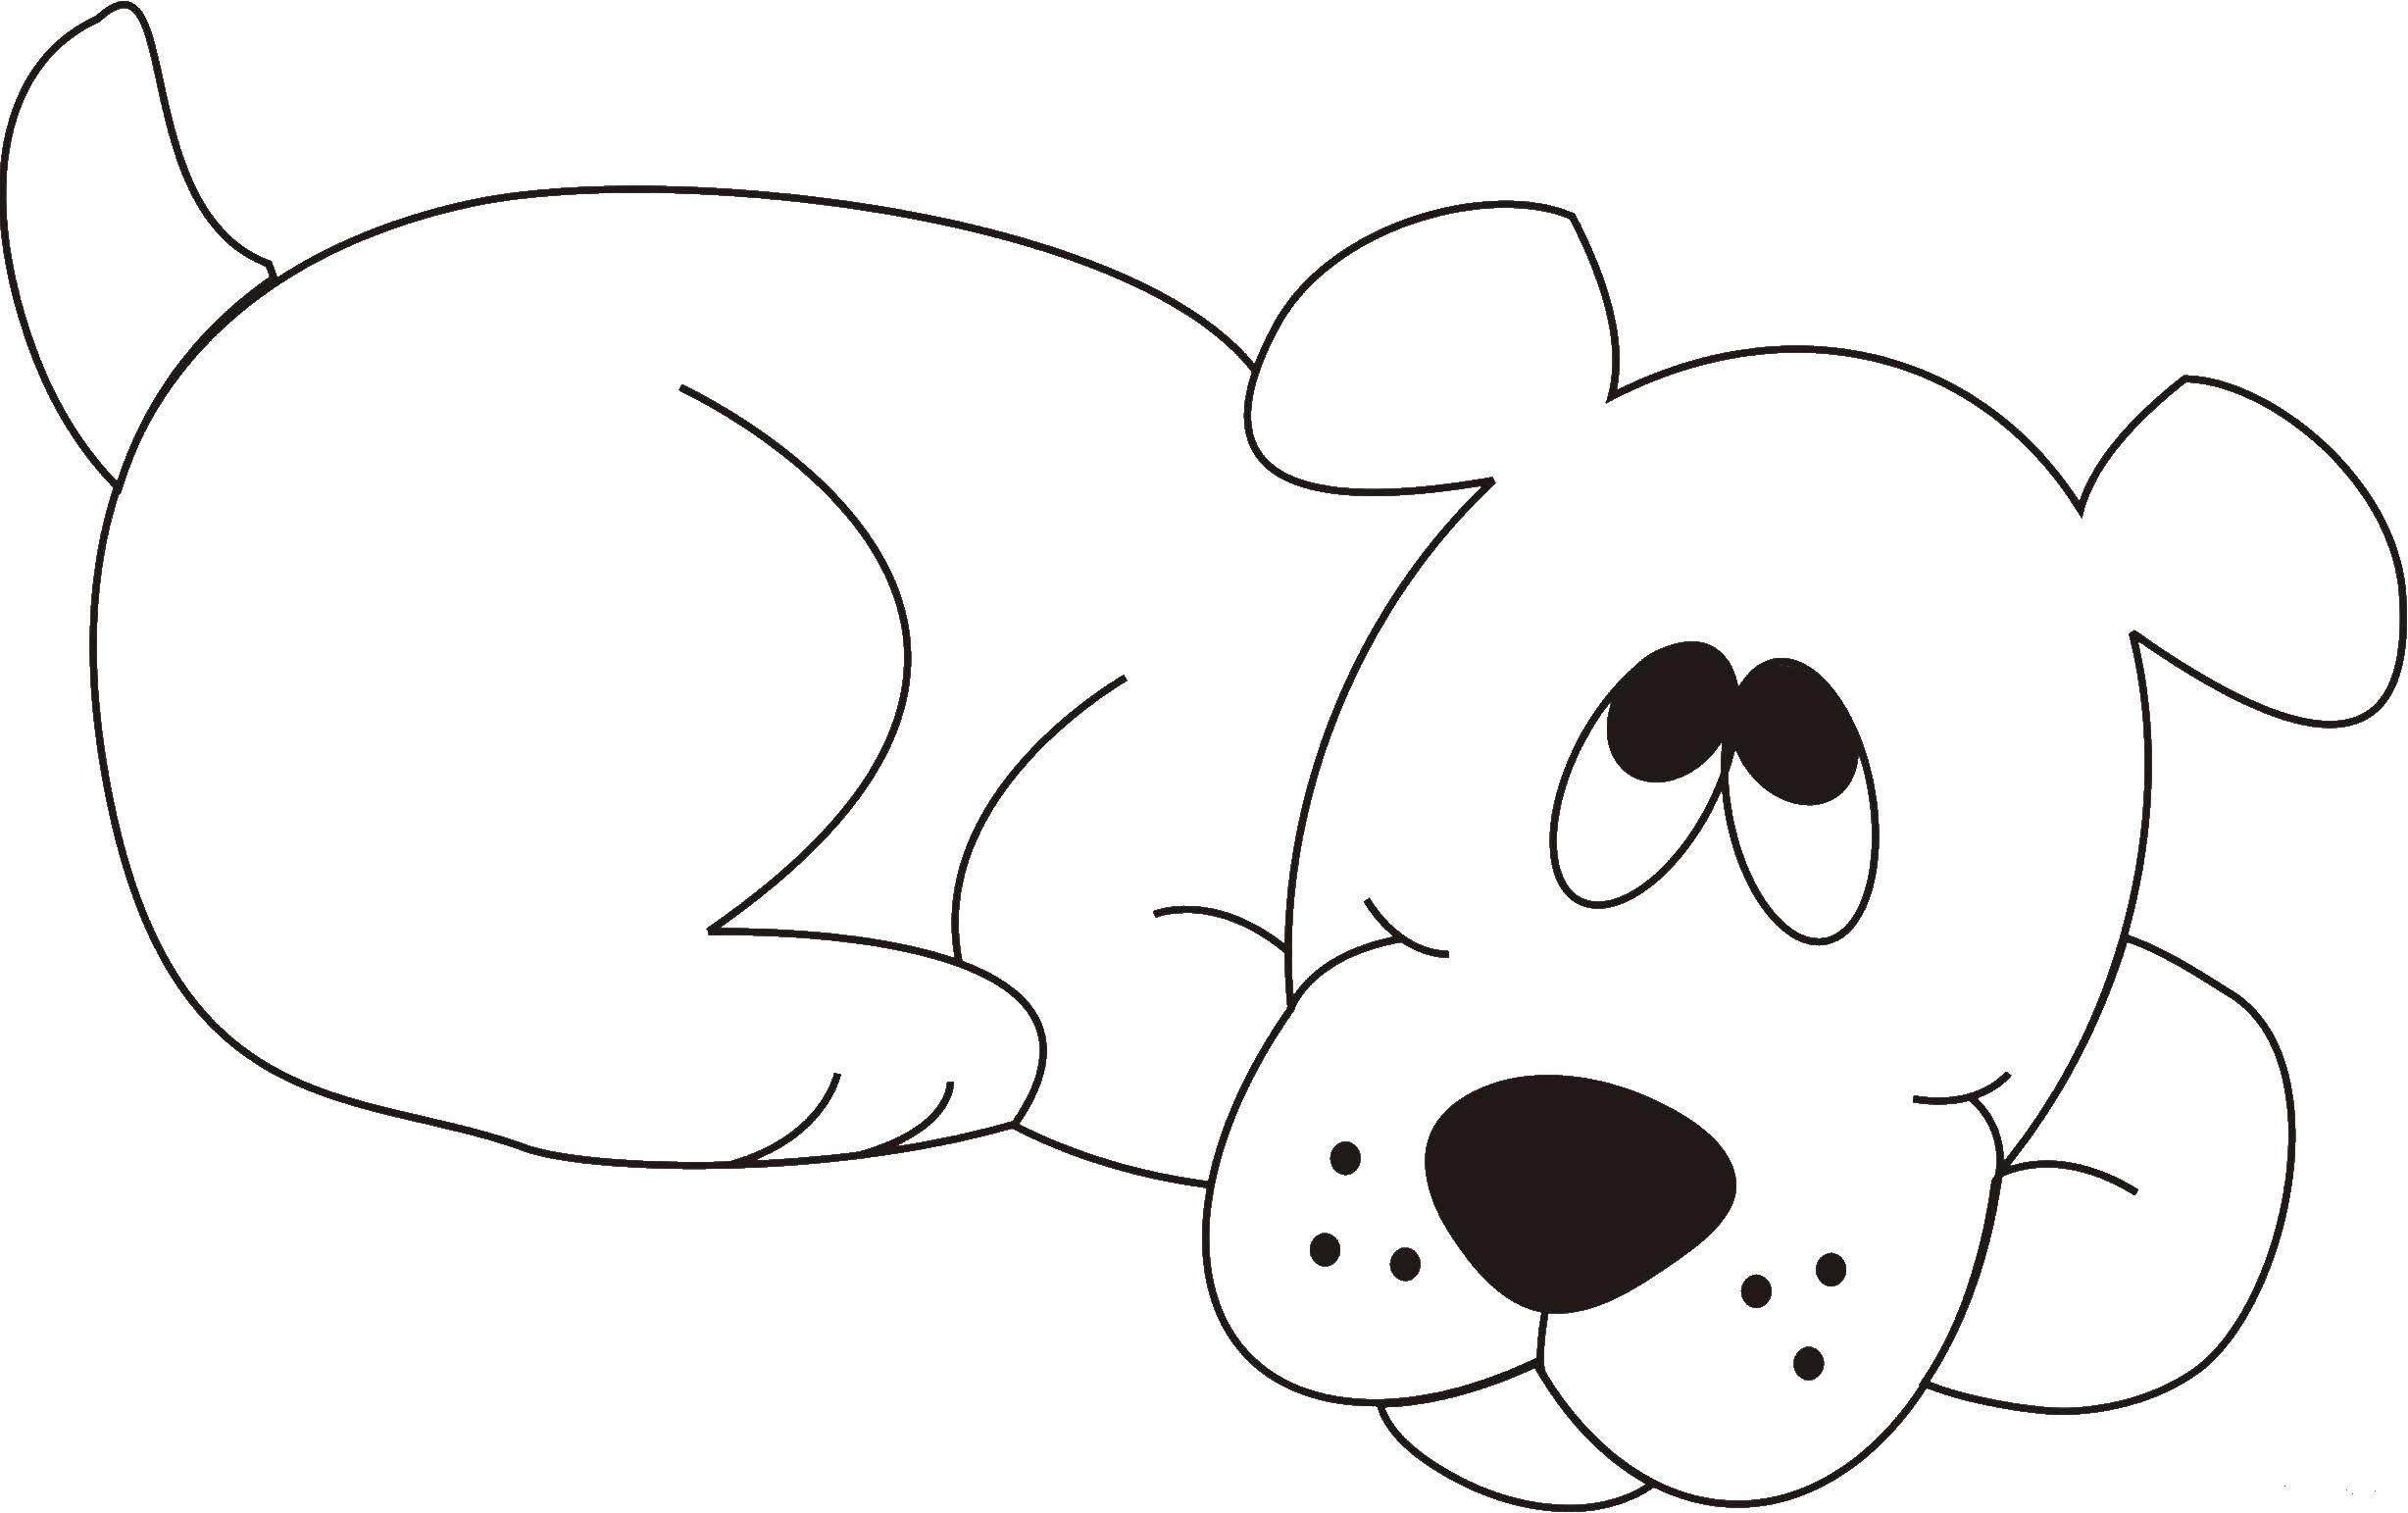 Coloring Dog lies. Category Pets allowed. Tags:  the dog.